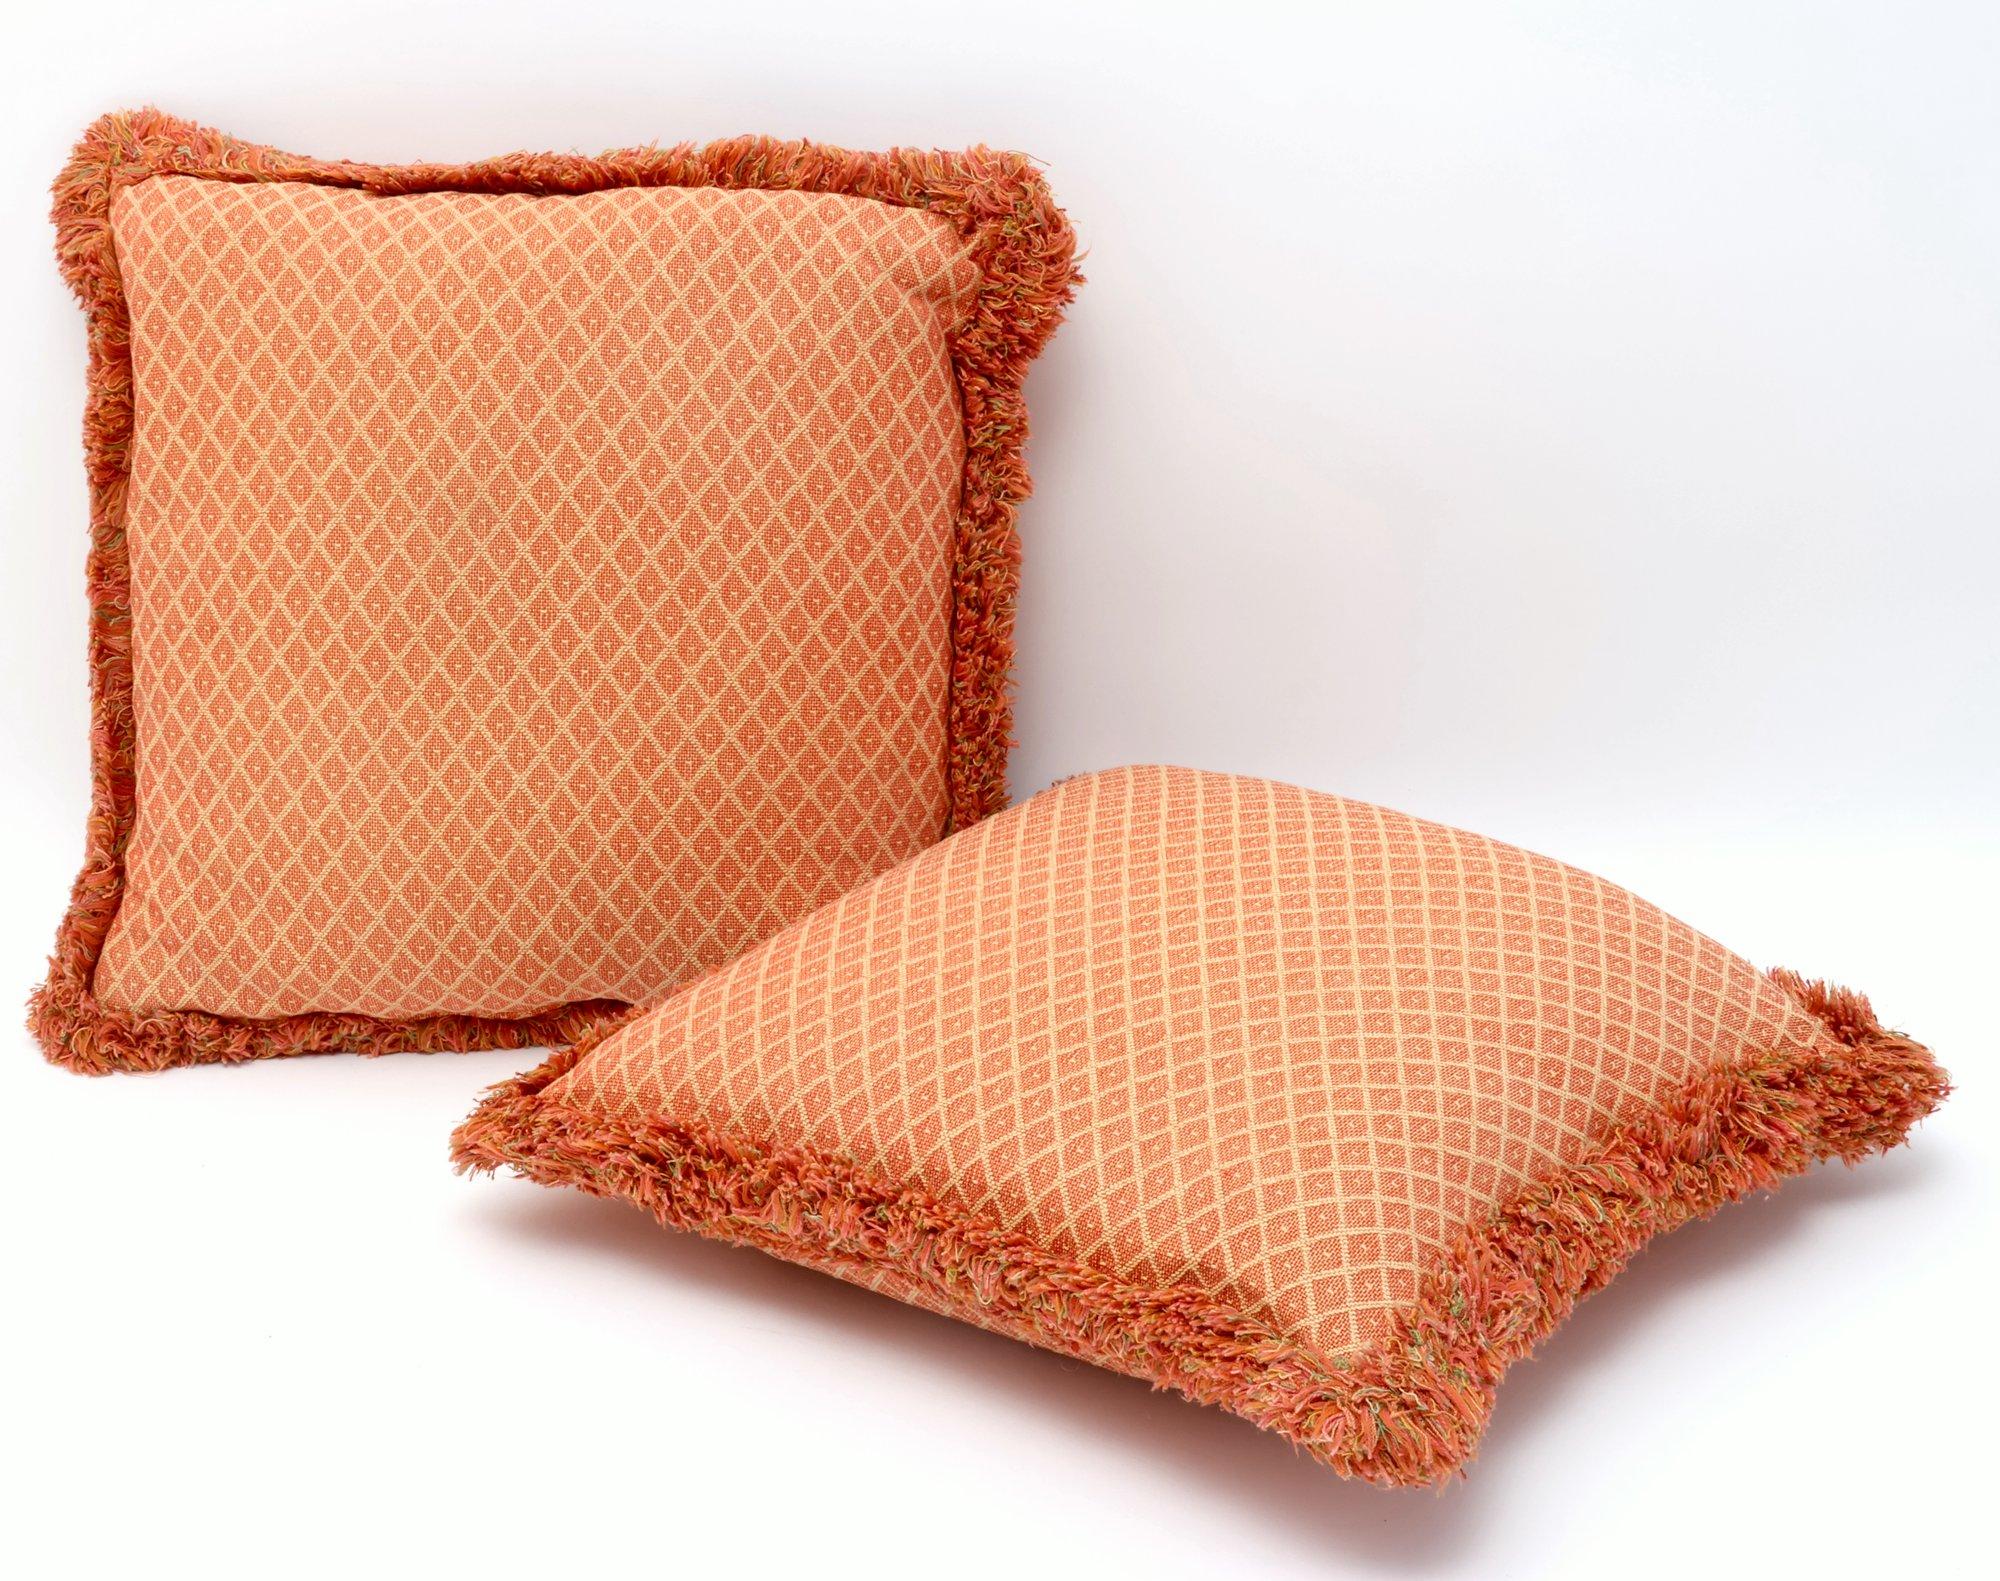 Custom Cross Stitched Throw Pillows With Contrasting Fringe